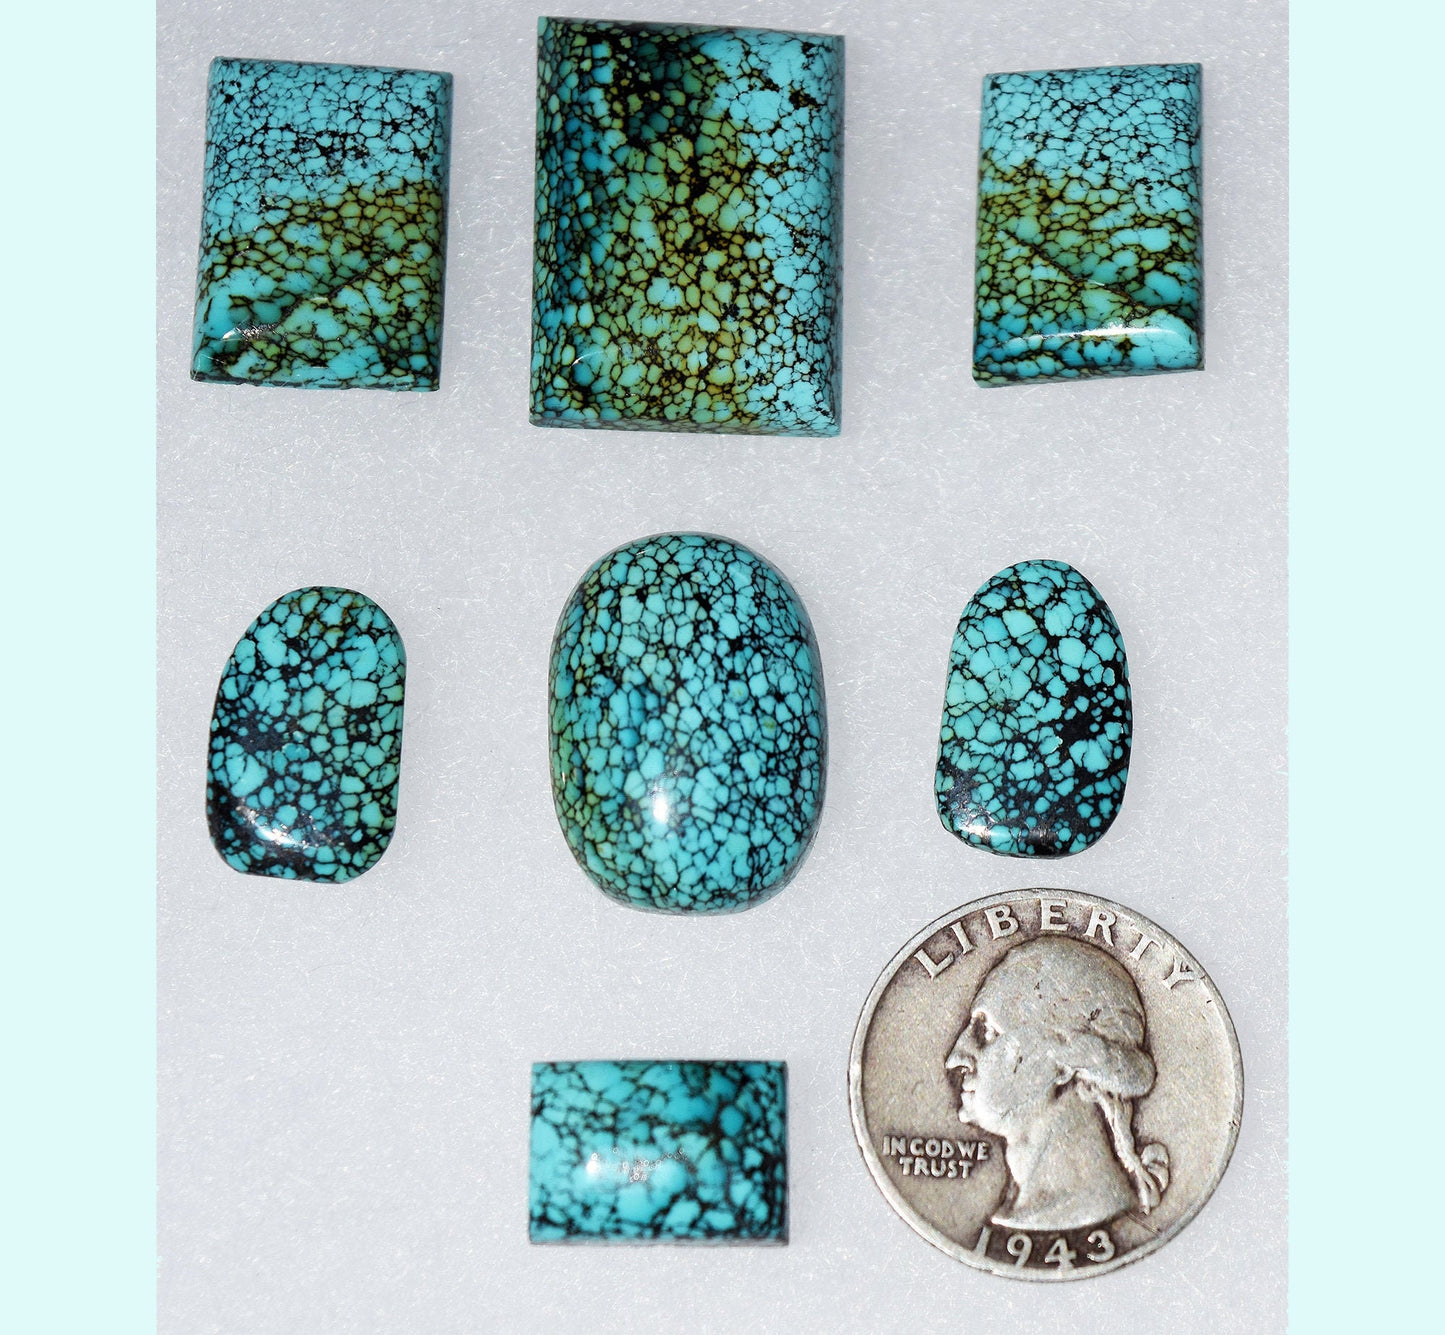 UNHEARD OF! Top-grade 100% natural, unbacked and untreated Gem Spiderweb Turquoise suite weighing over 130 carats, total!